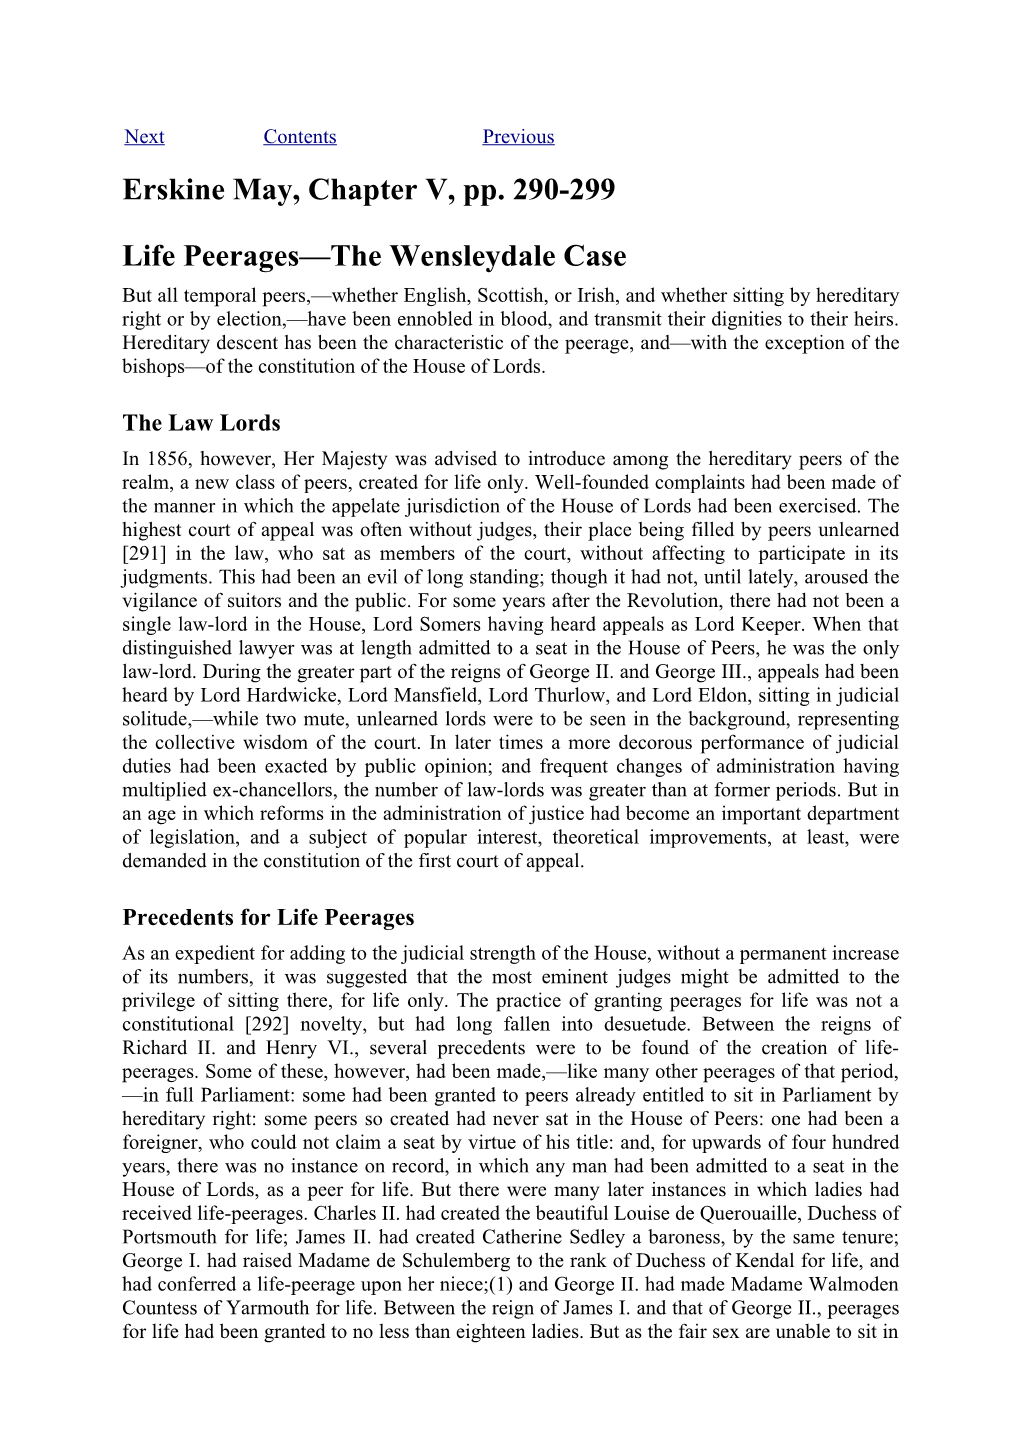 Erskine May, Chapter V, Pp. 290-299 Life Peerages—The Wensleydale